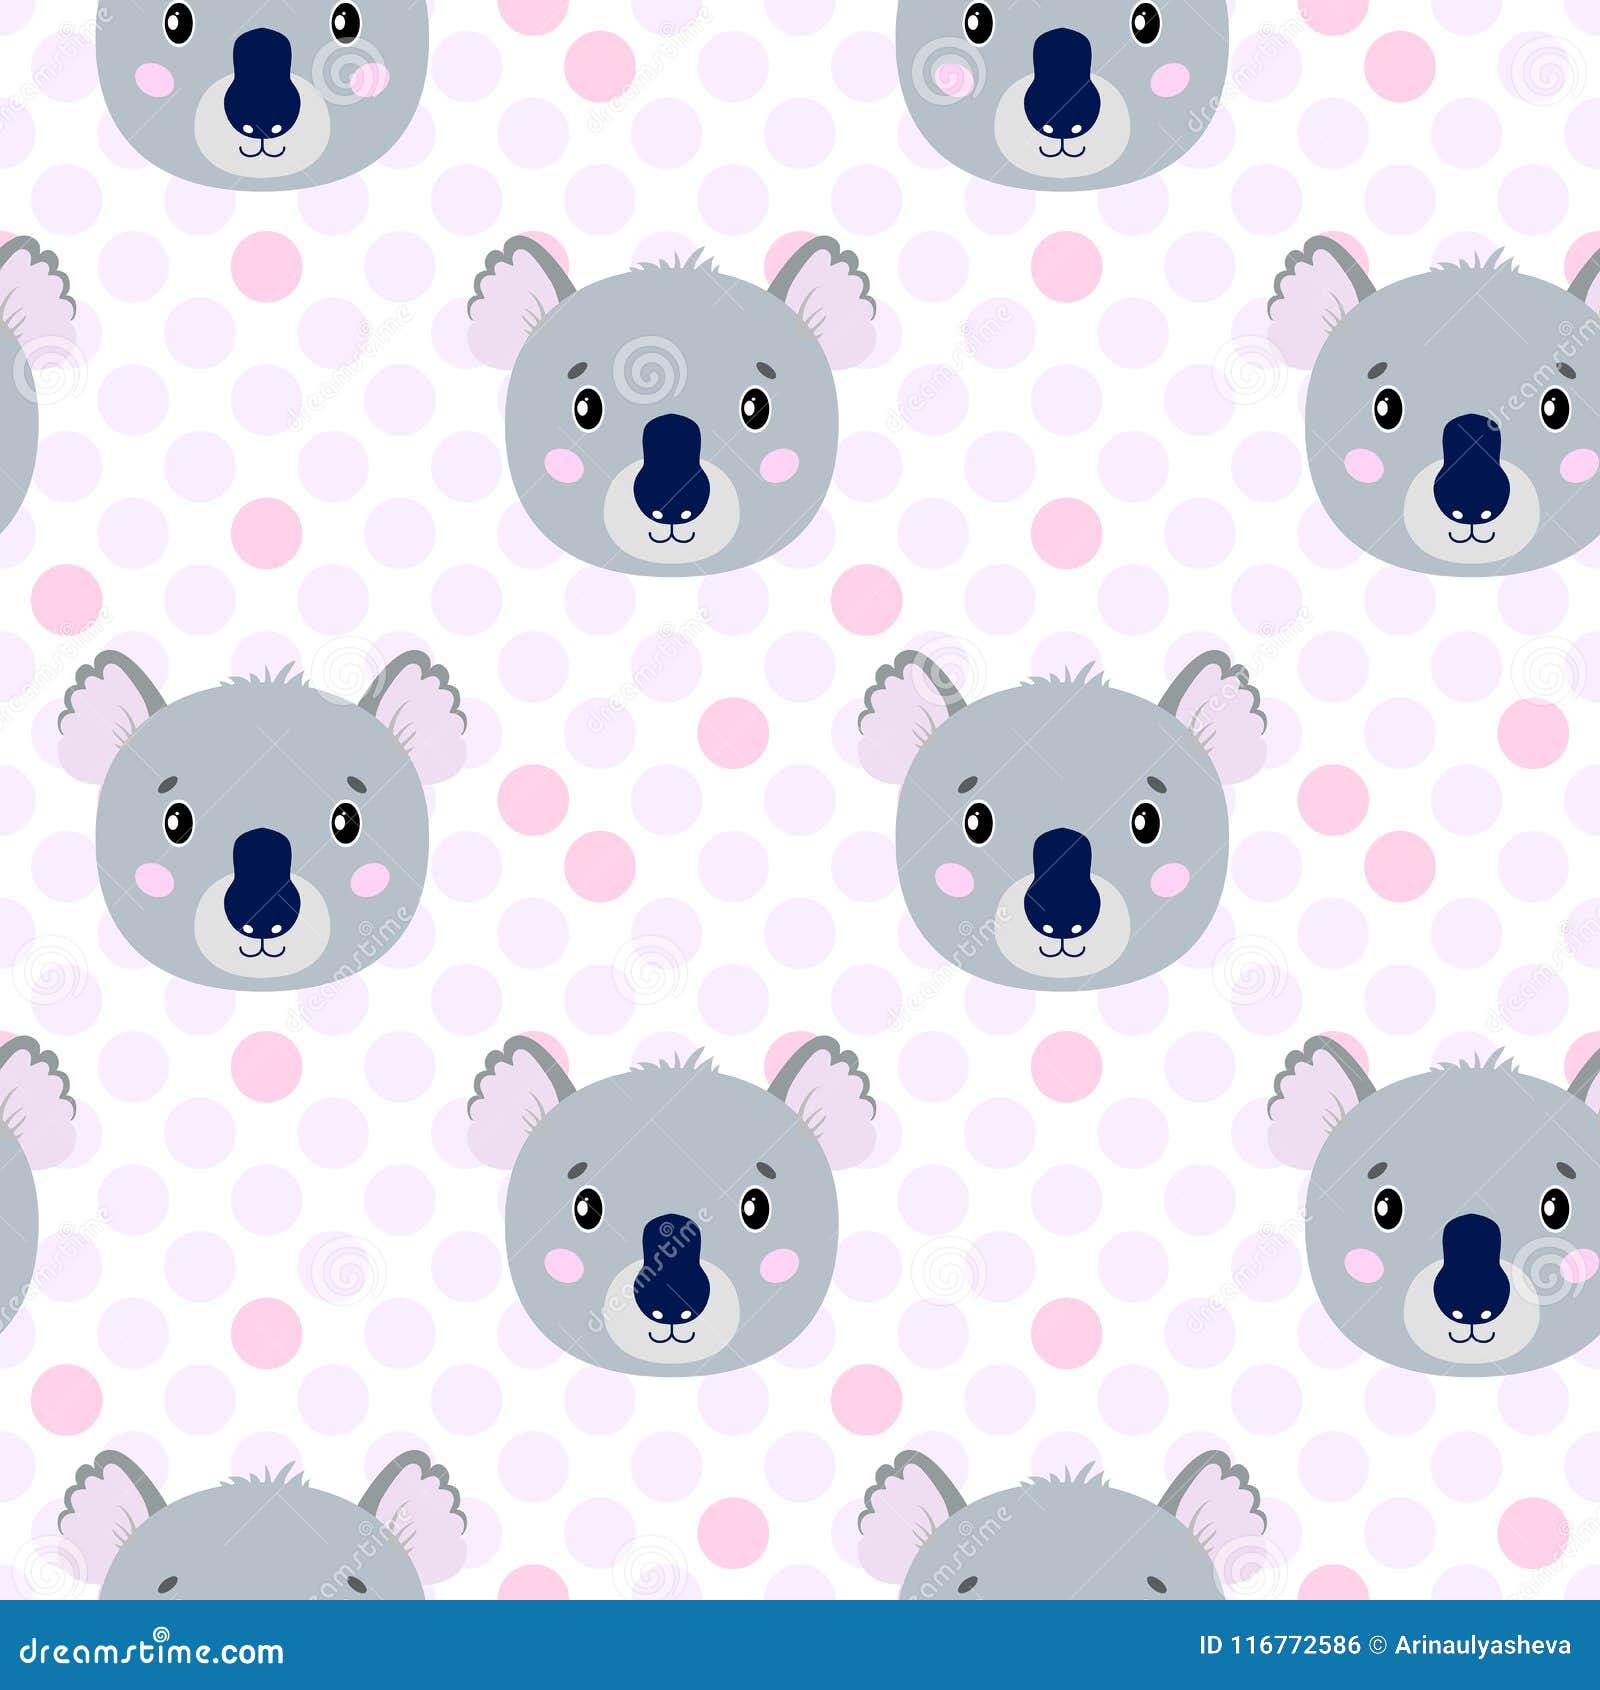 cute  seamless pattern with koala face, hare. on white background in polka dots.